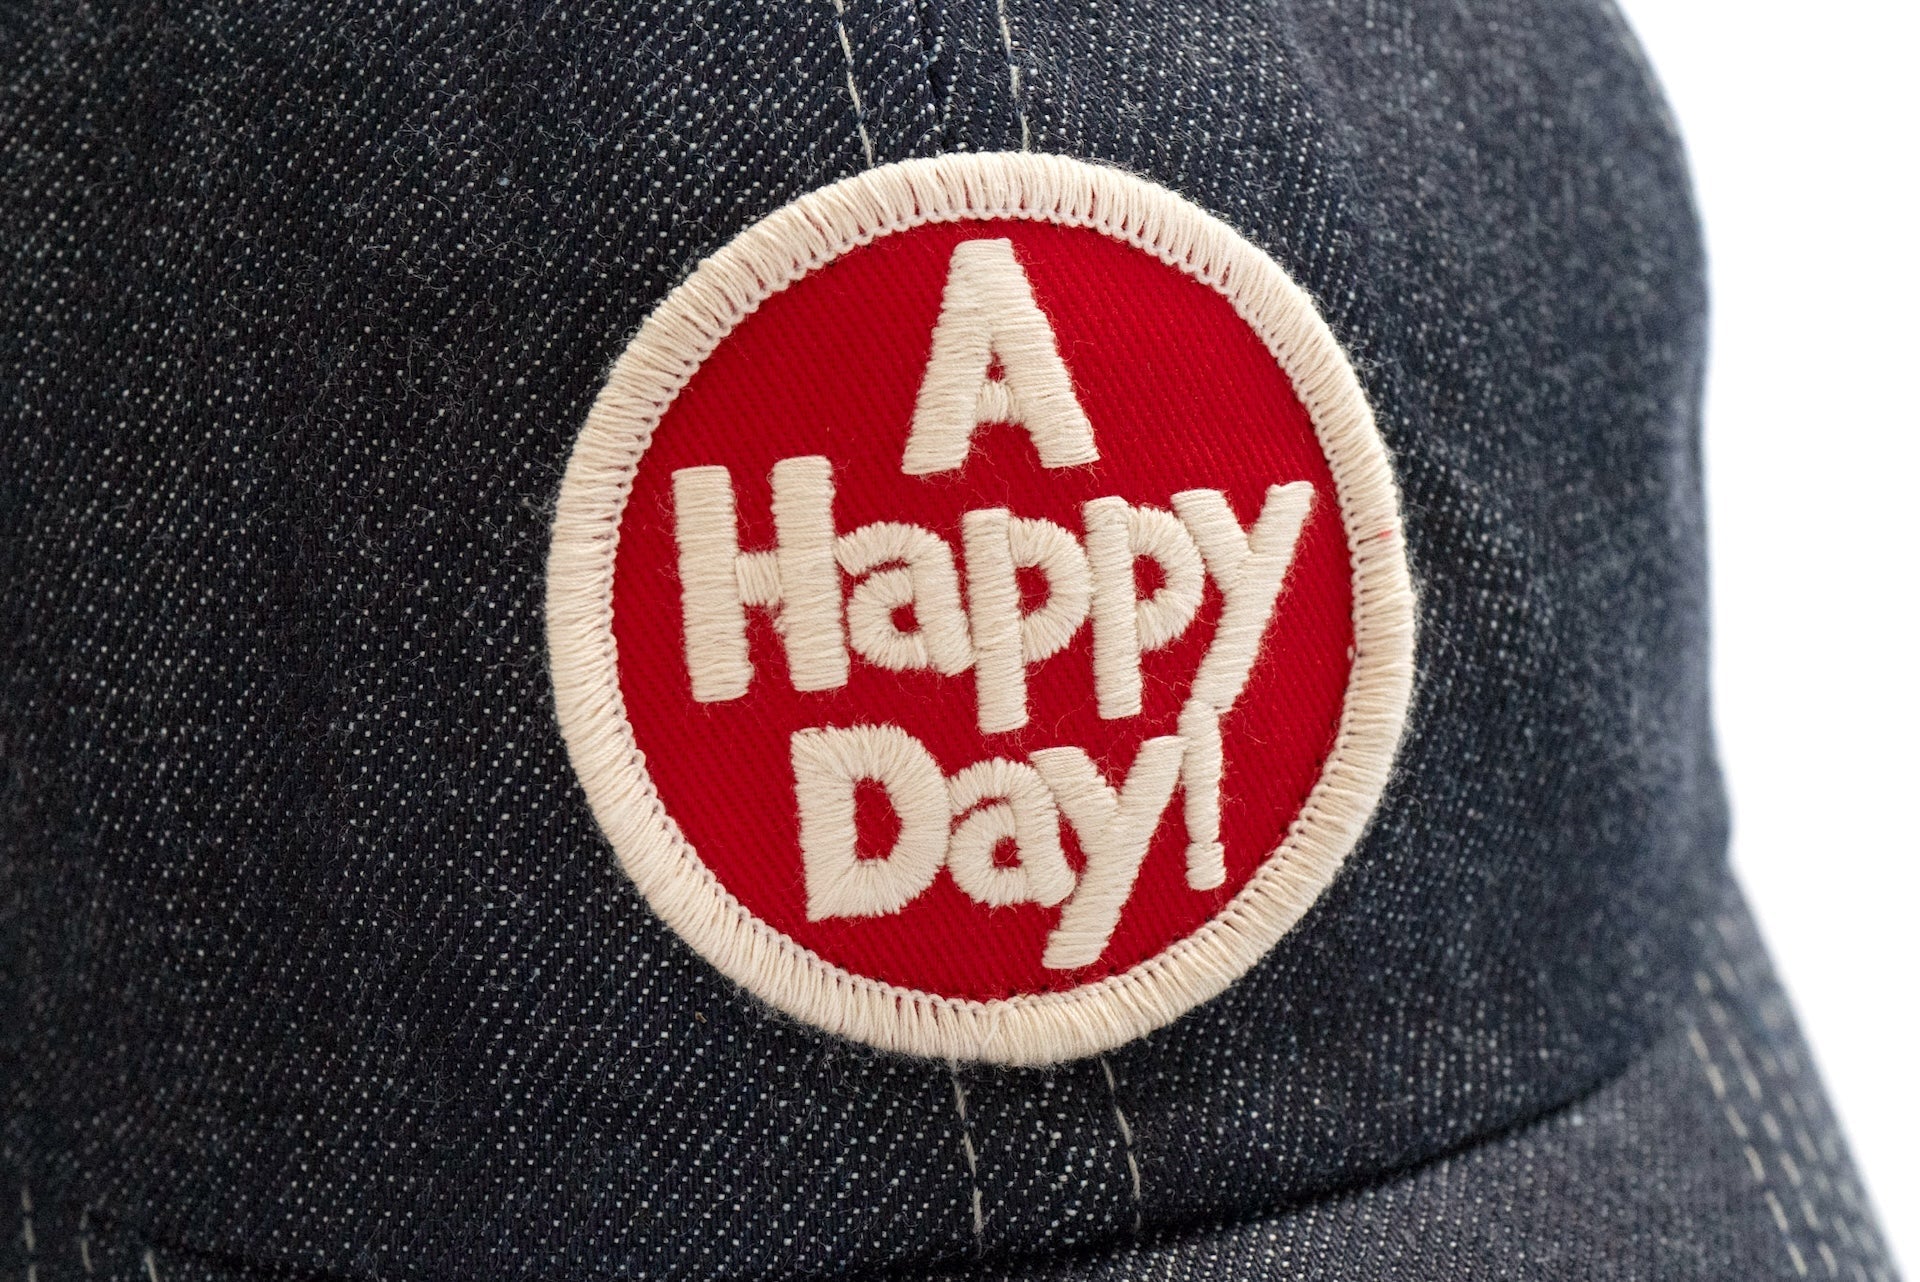 UES "A Happy Day" Denim Baseball Cap (55th Anniversary Limited Edition)